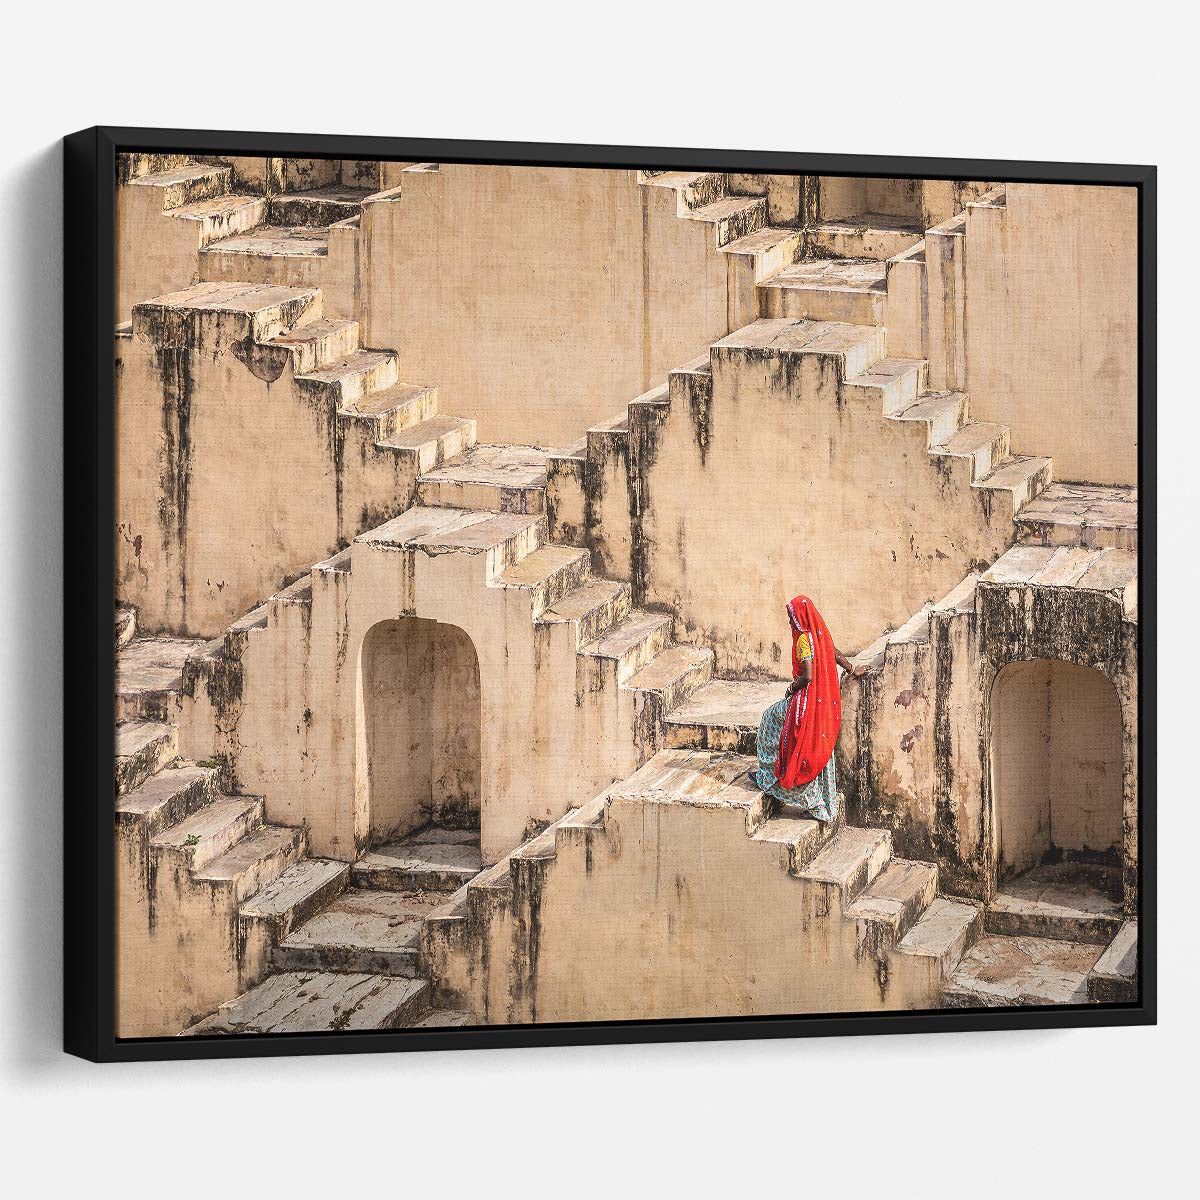 India's Ancient Stepwell Historical Architecture Photography Wall Art